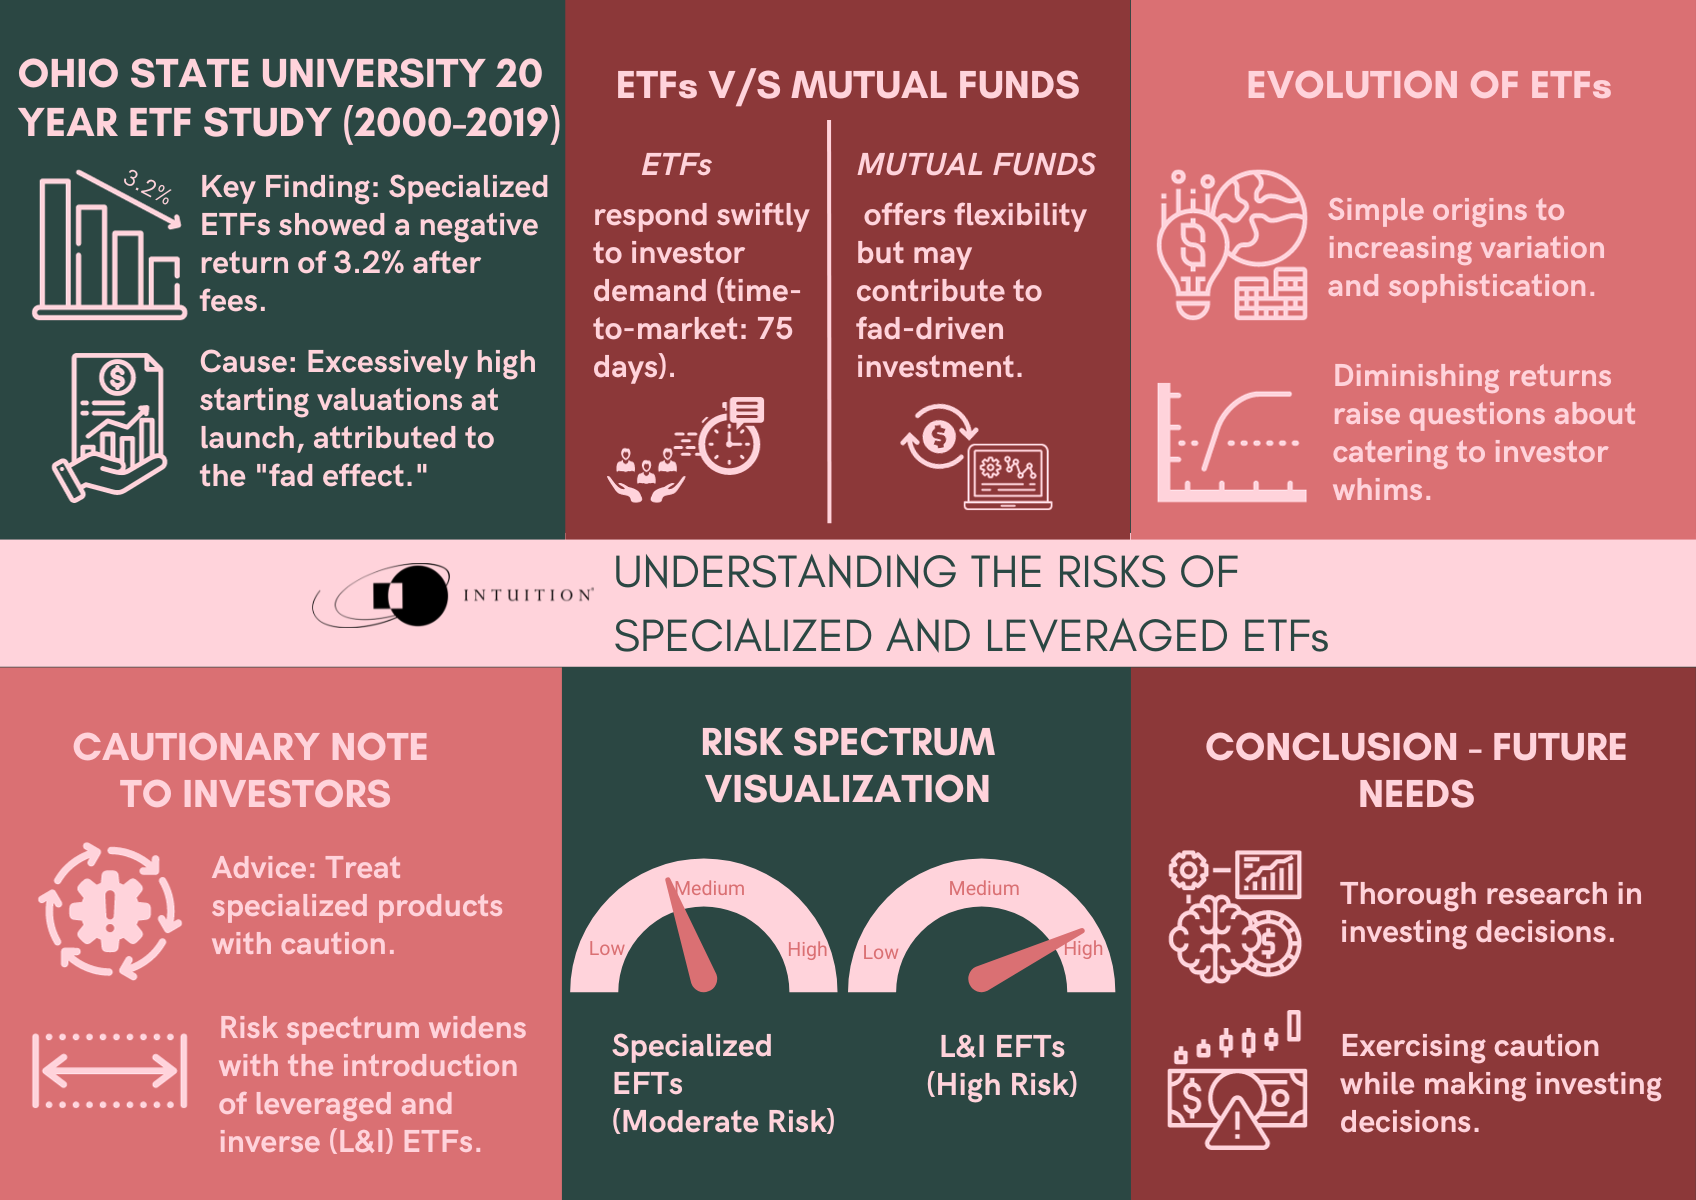 Understanding the risks of specialized and leveraged ETFs